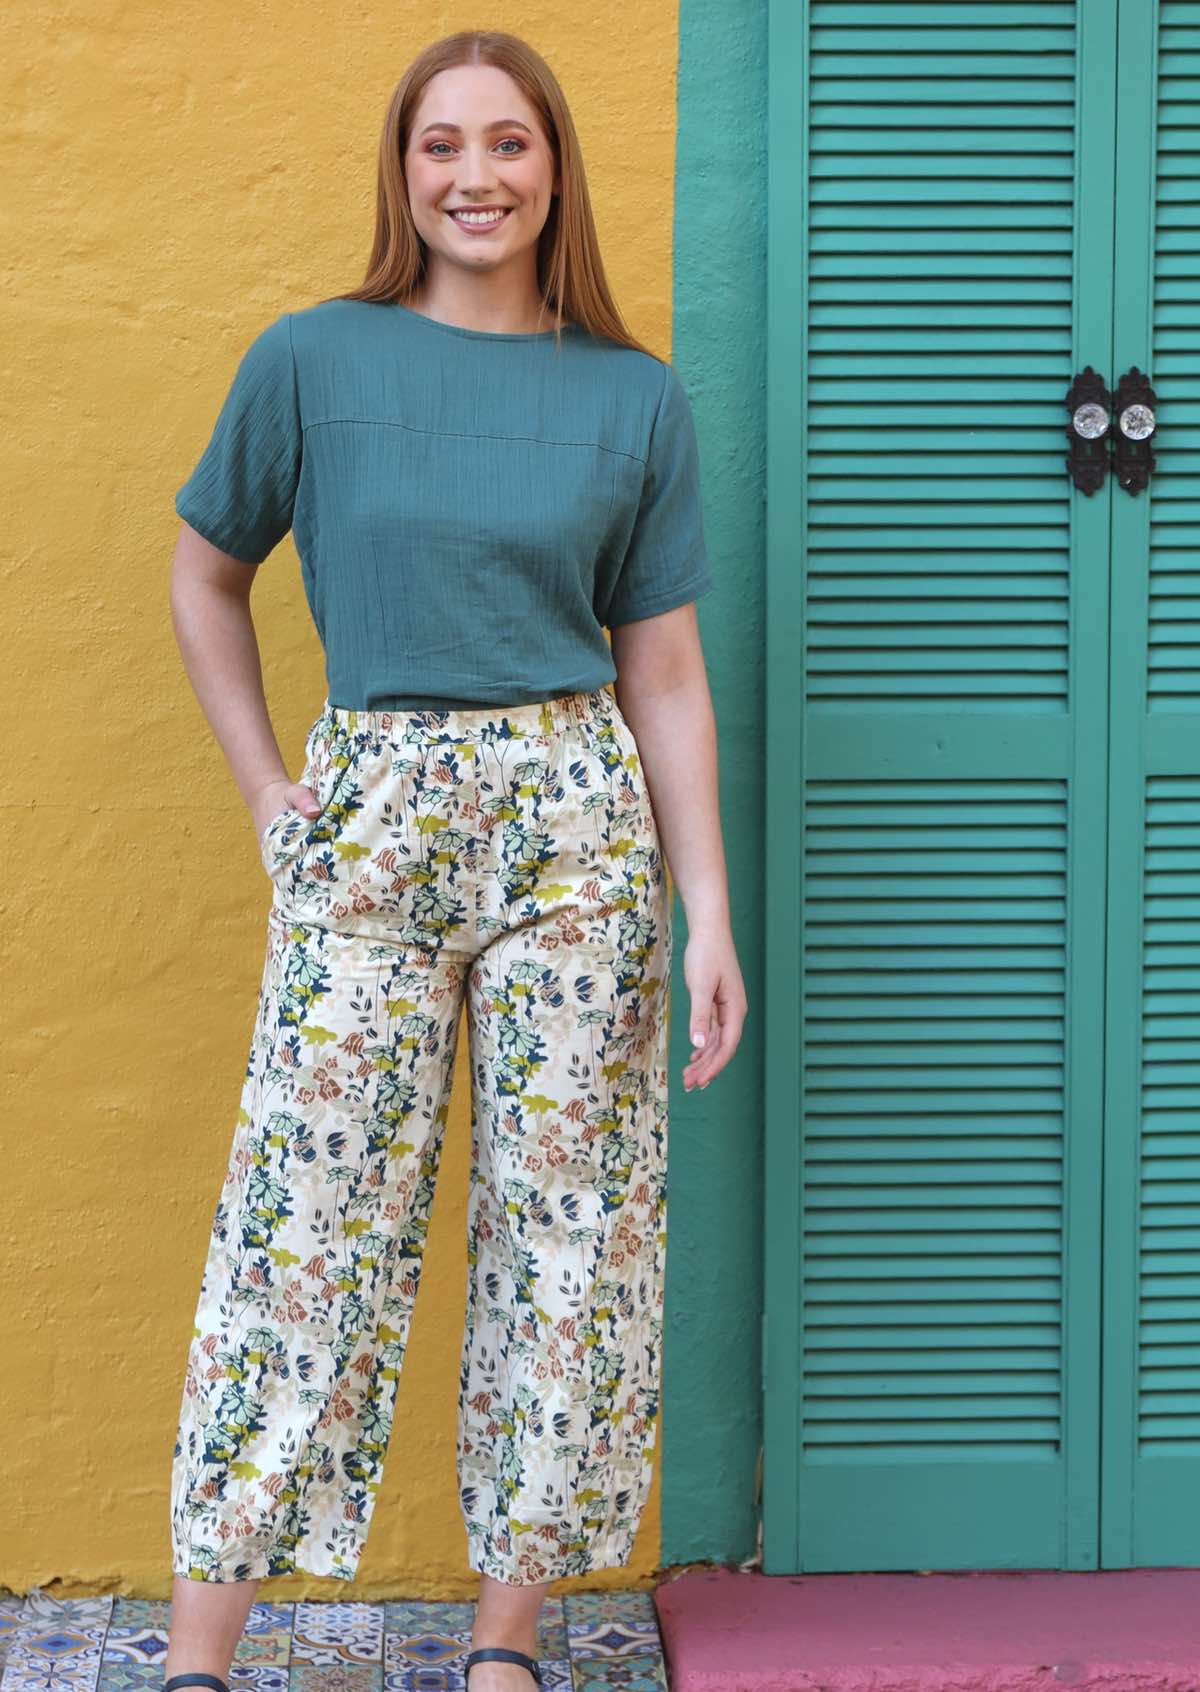 Greta Pants high waisted women's pants elasticated waistband side pockets pleats at side of ankles 100% cotton off white background with green and nude toned floral | Karma East Australia